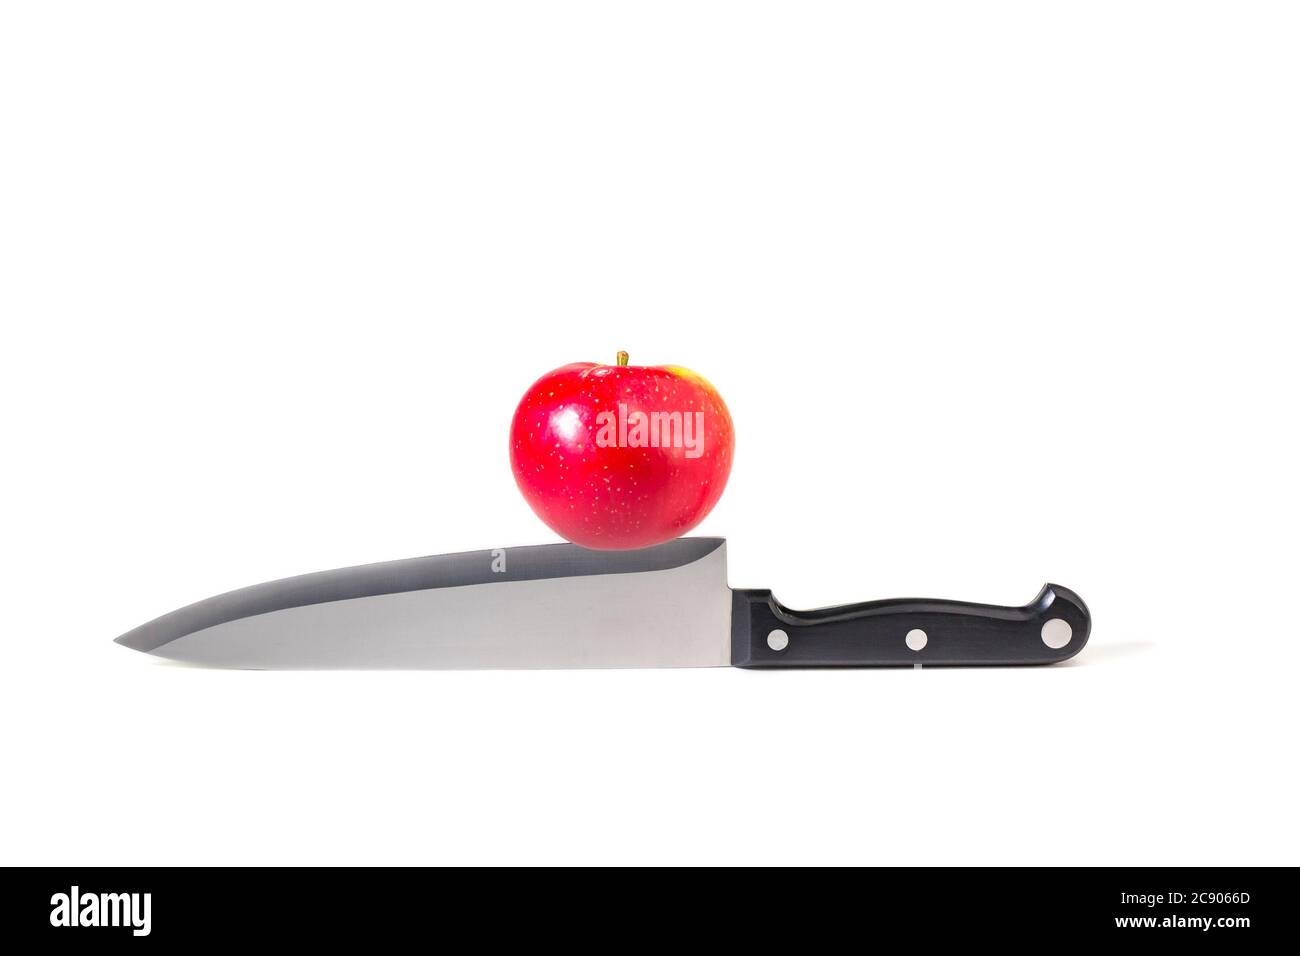 Red apple resting on cutting blade edge of large kitchen knife on white background. Concept photography: at the cutting edge, on a knife-edge. Stock Photo